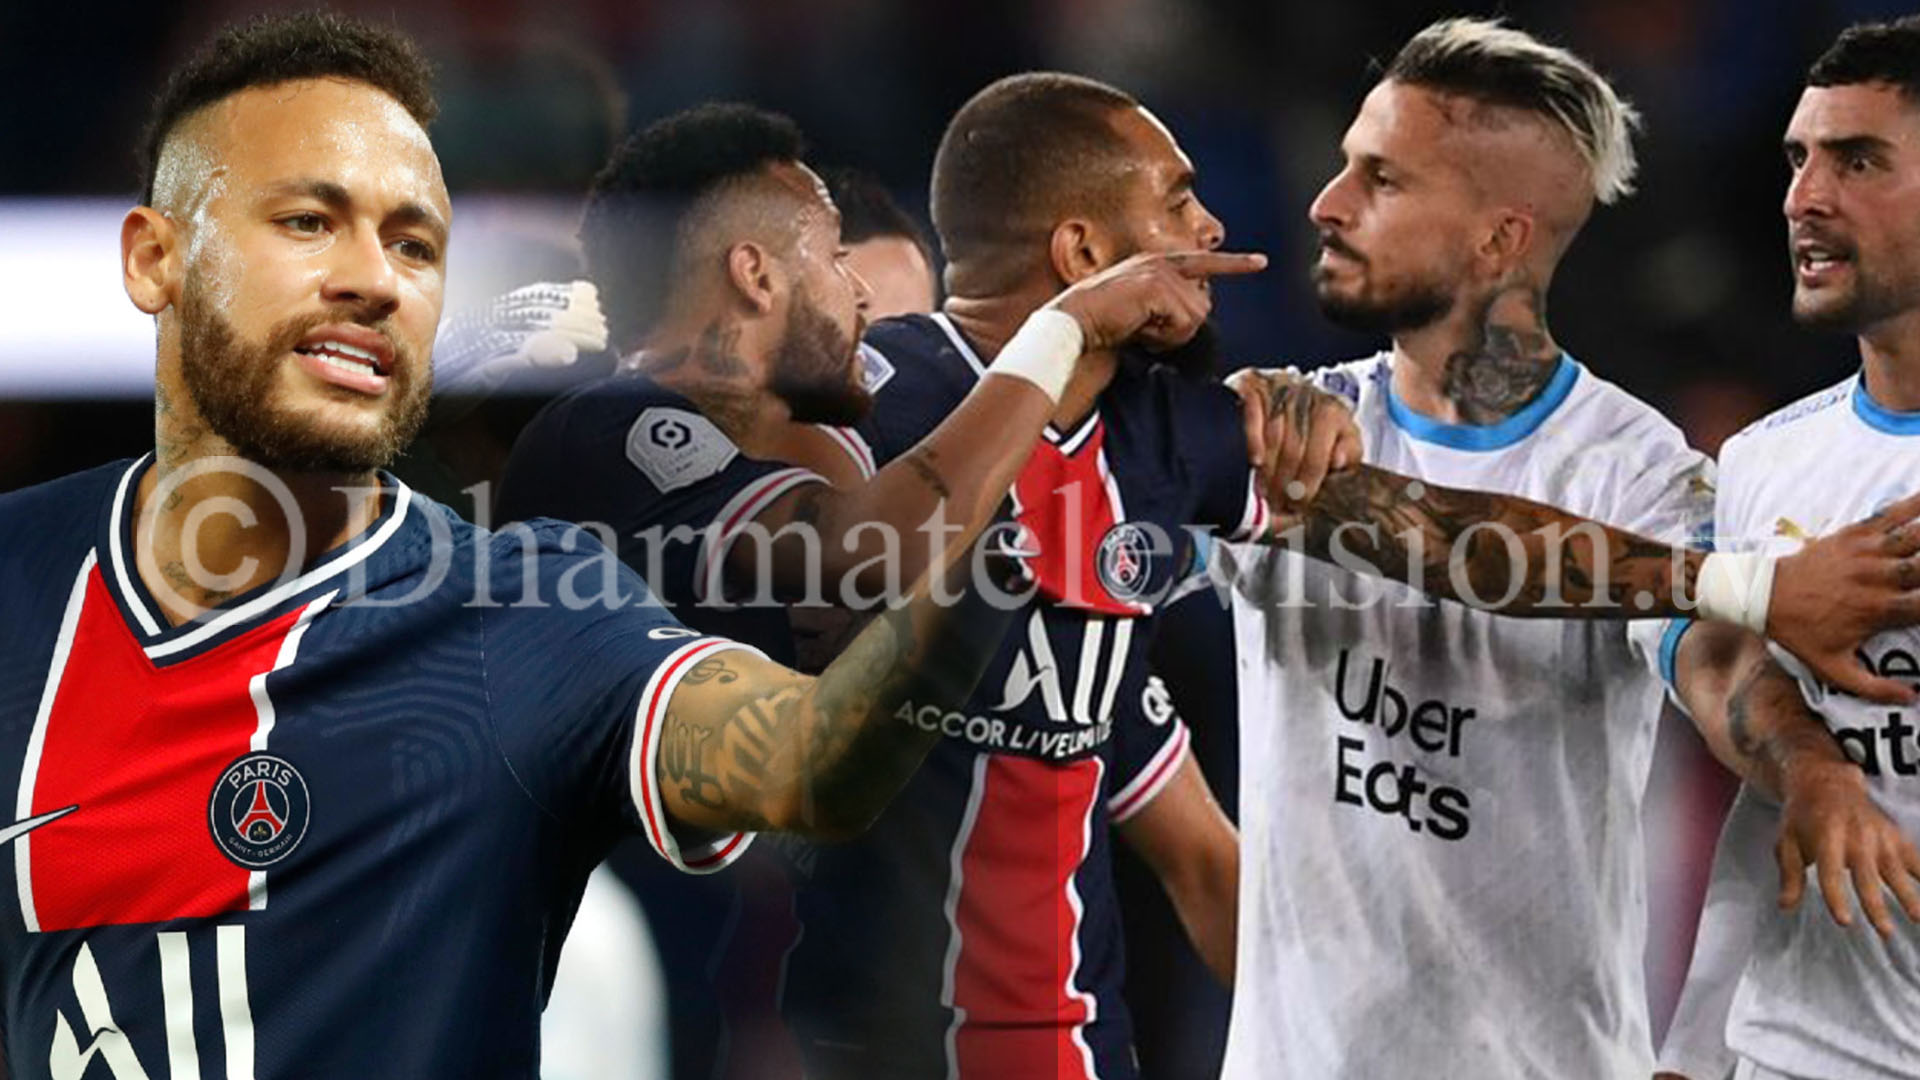 Neymar was one of five players sent off after an injury-time brawl as Marseille beat Paris St-Germain in Ligue 1